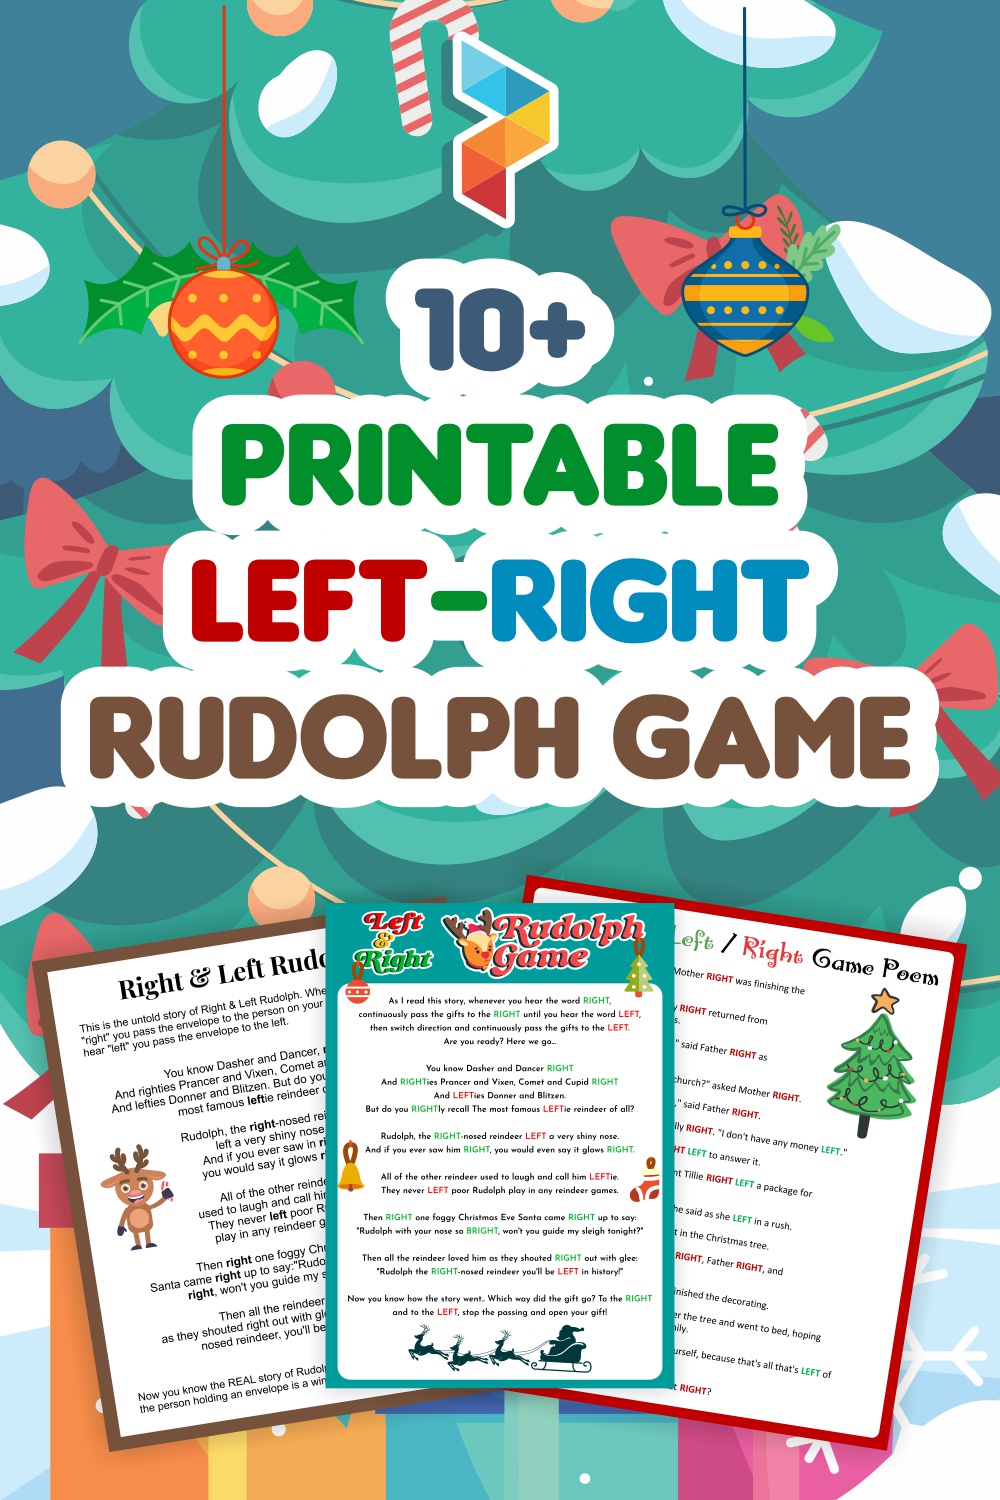 Printable Left-Right Rudolph Game